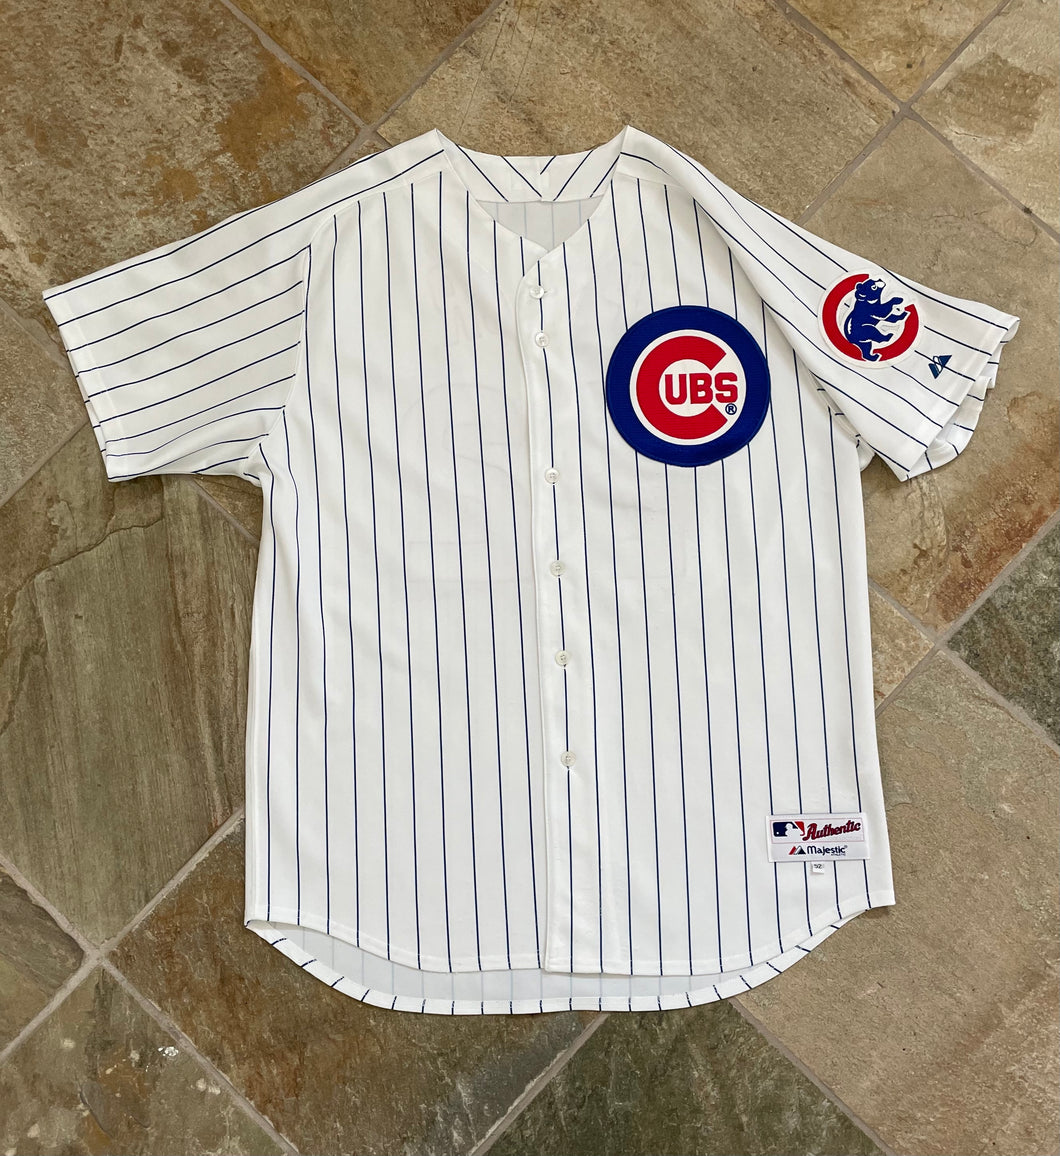 Vintage Chicago Cubs Mark Prior Majestic Authentic Baseball Jersey, Size 52, XXL